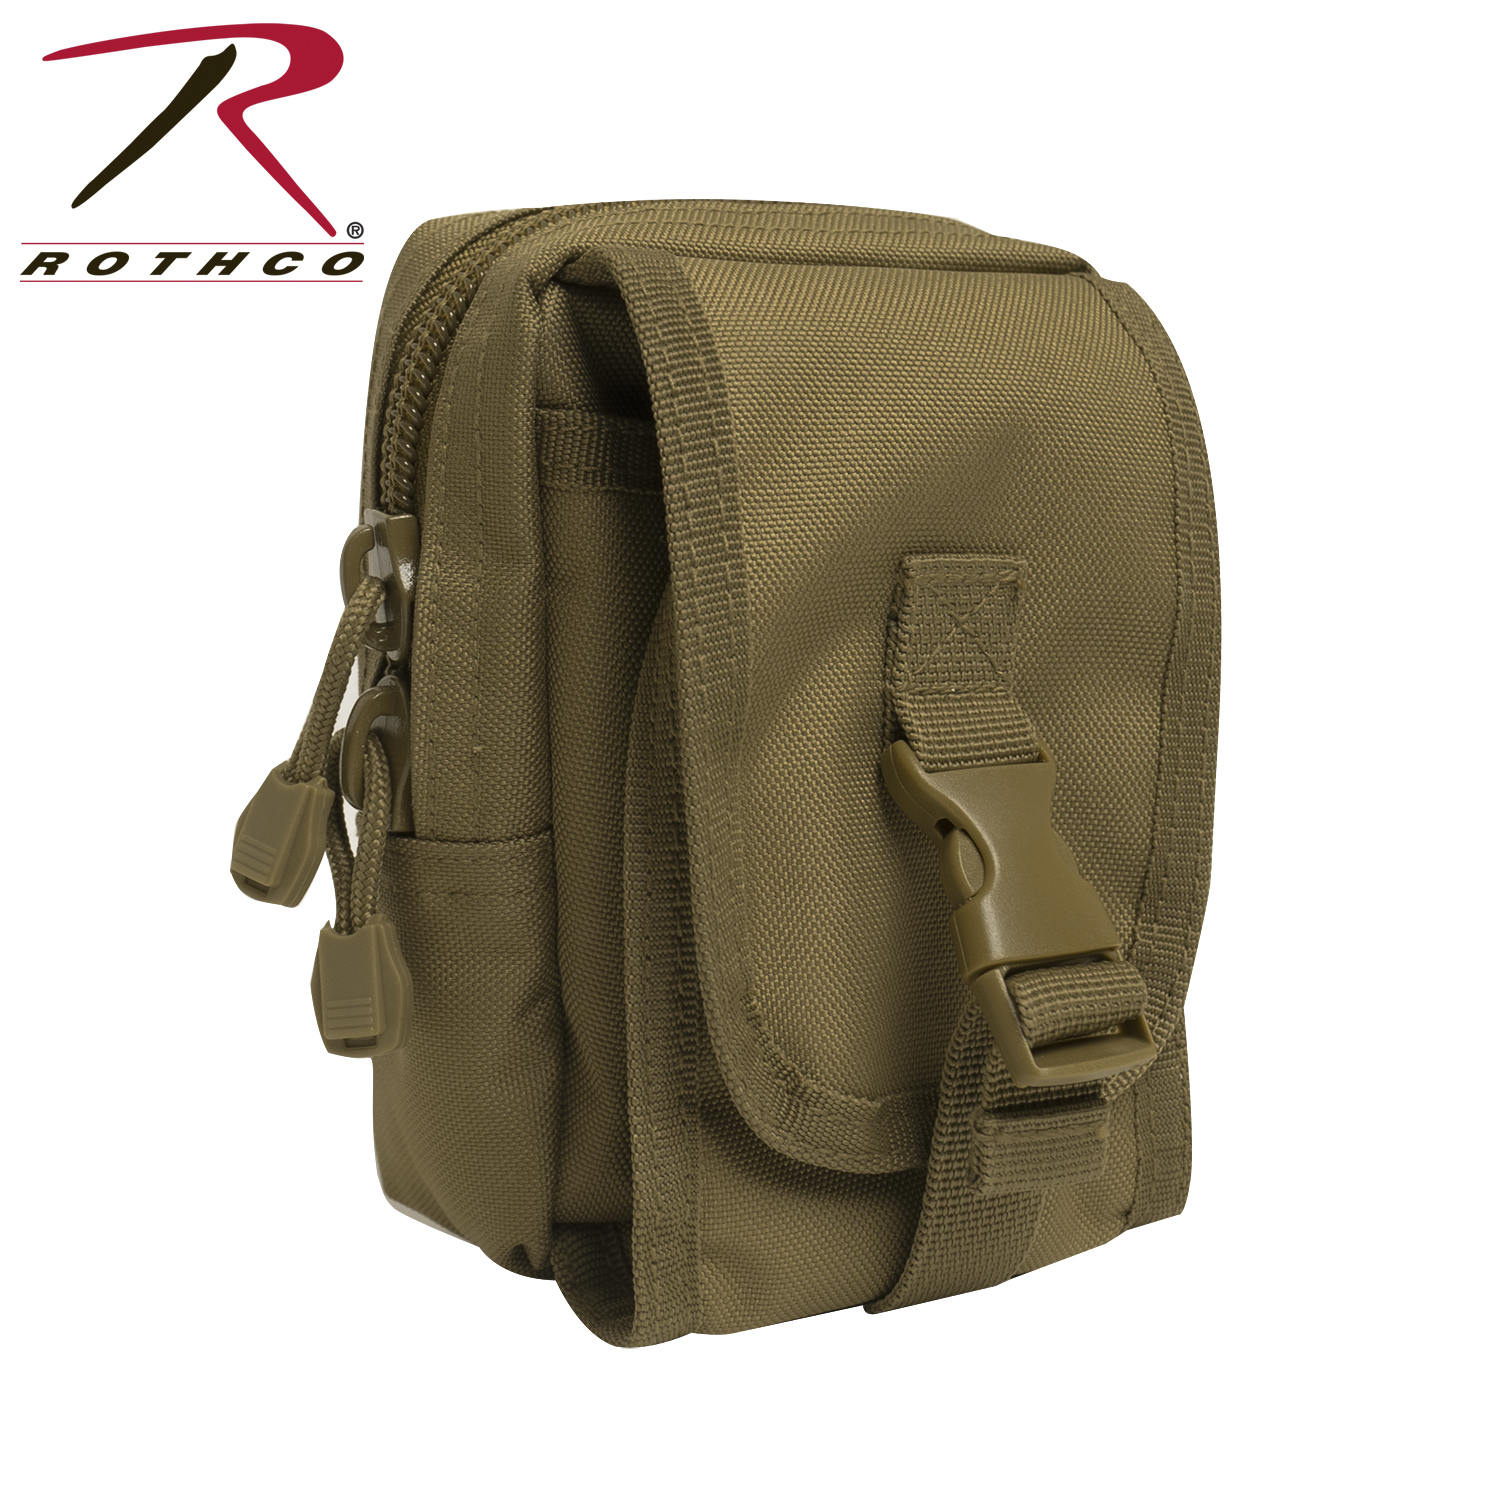 https://op1.0ps.us/original/opplanet-rothco-molle-compatible-accessory-pouch-coyote-brown-3874-coyotebrown